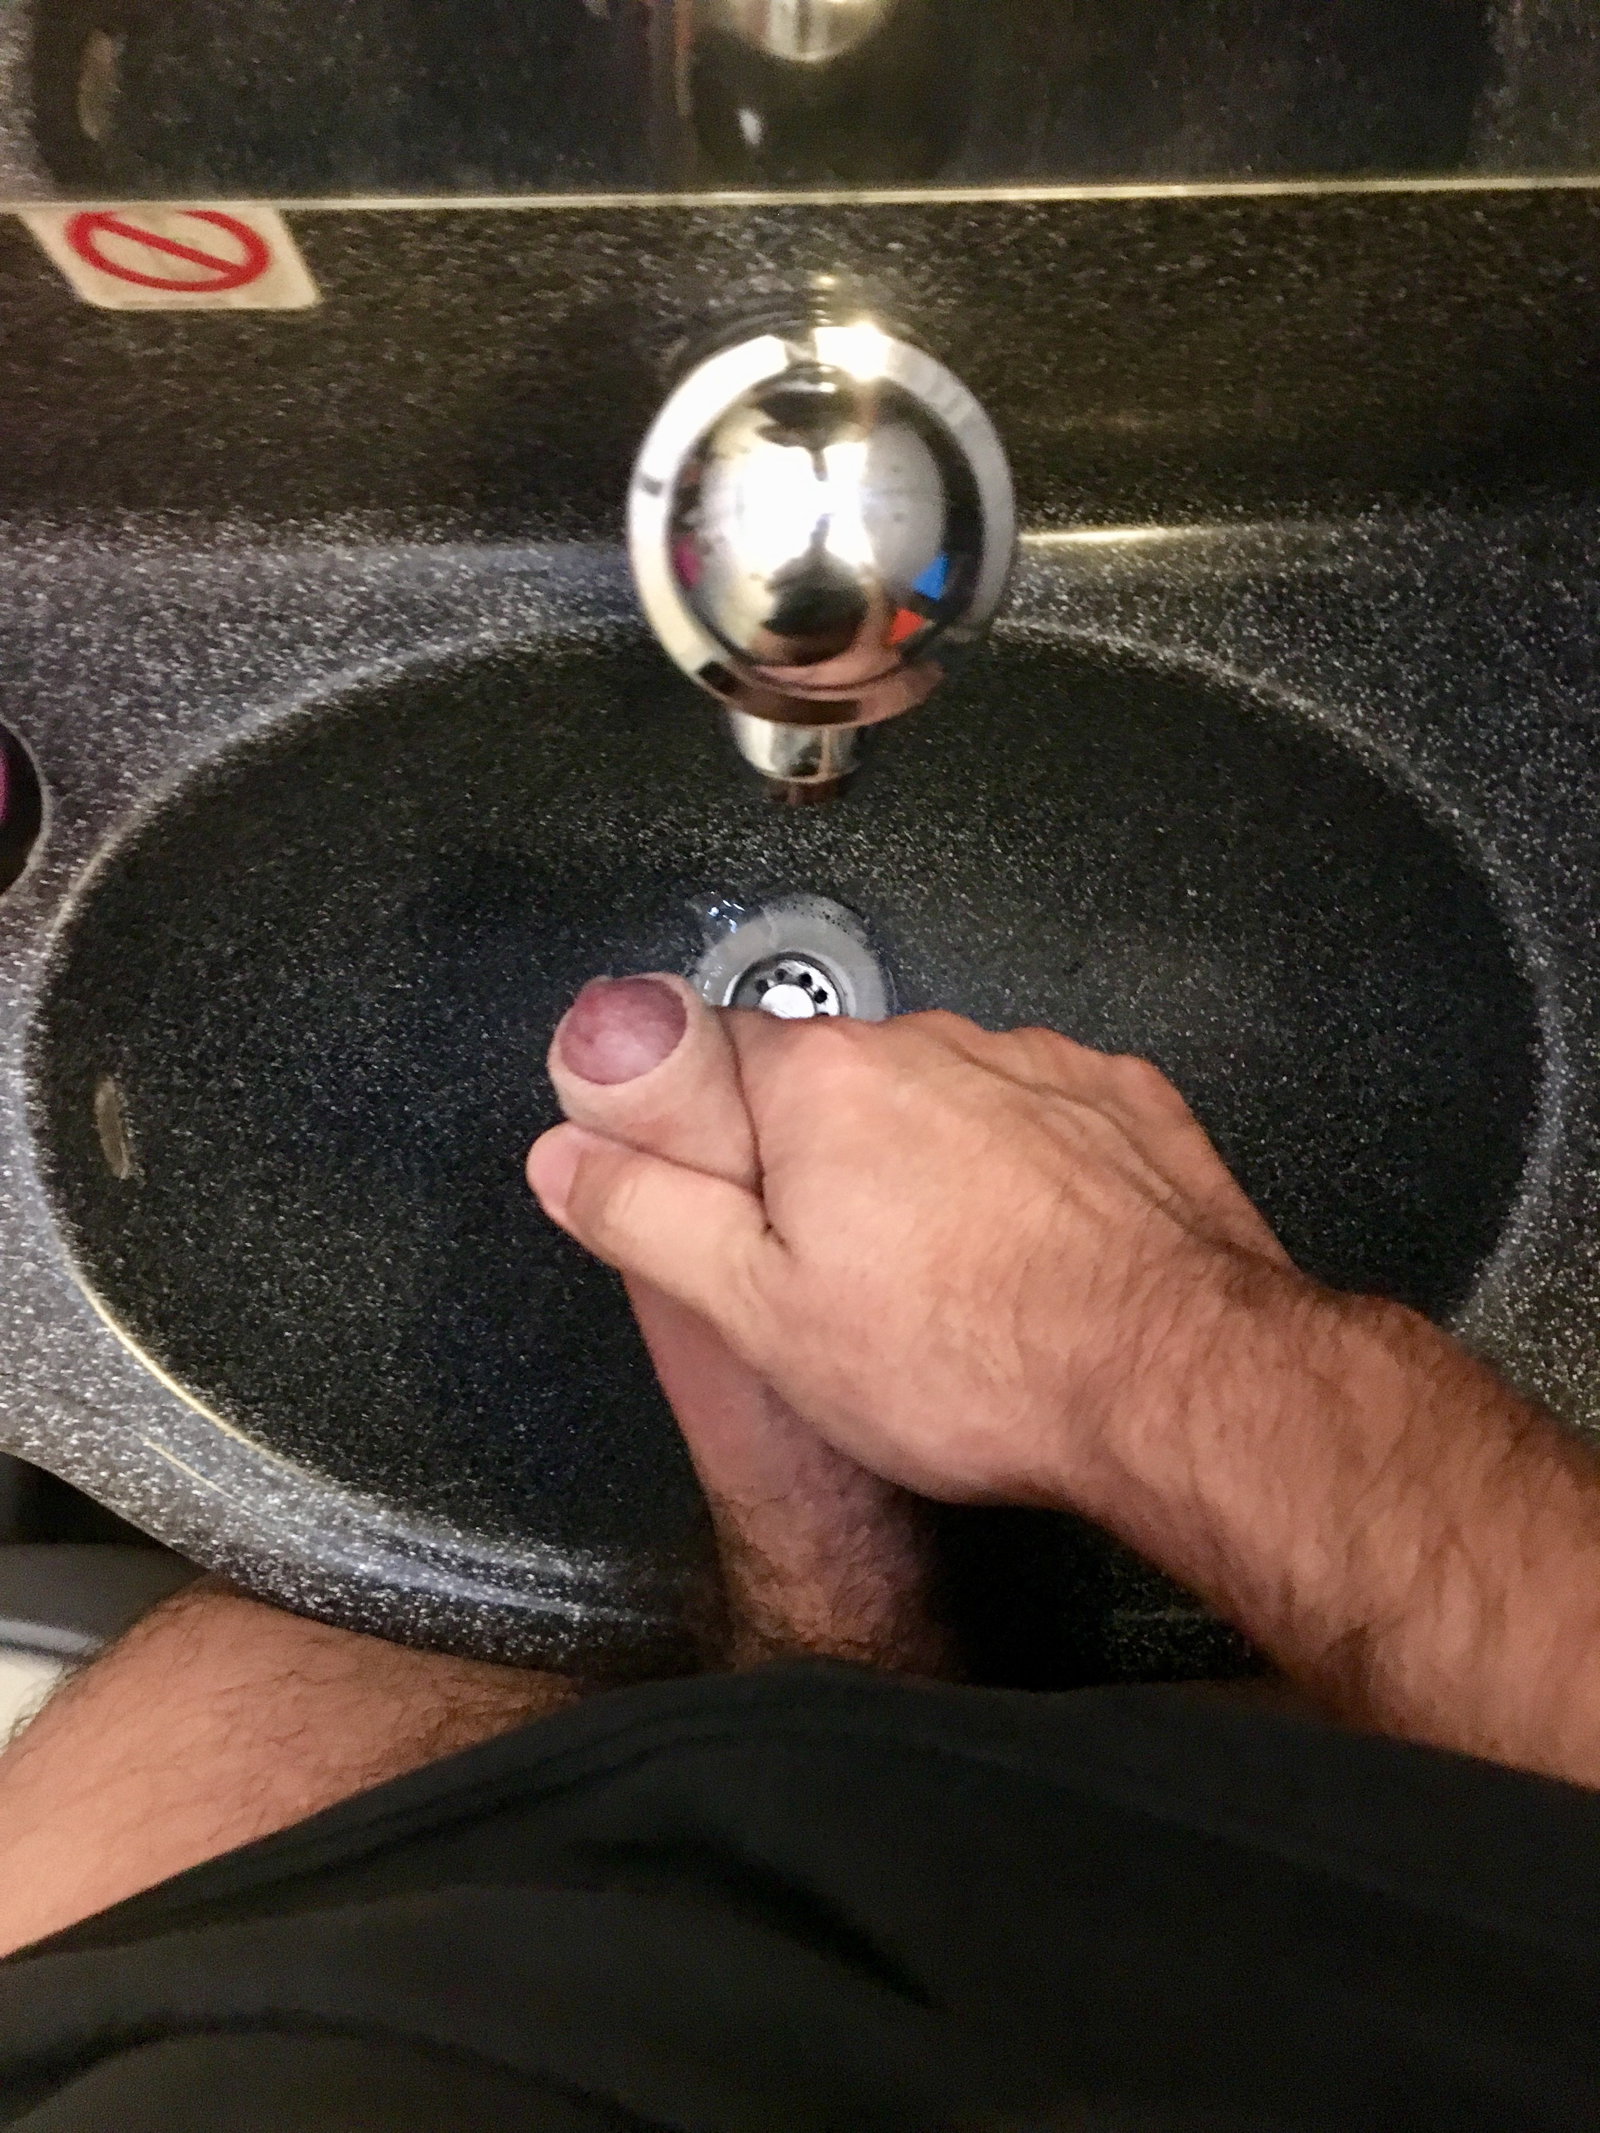 Photo by Fan in Heat with the username @faninheat, who is a verified user,  December 10, 2018 at 10:18 AM and the text says 'That time I took some pics in the airplane’s restroom I ended up cumming in the sink. I think it got clogged with the slime.
#faninheat #amateur #gay #gayamateur #gayporn #cock #uncut #foreskin #cum #cumshot #jerkingoff'